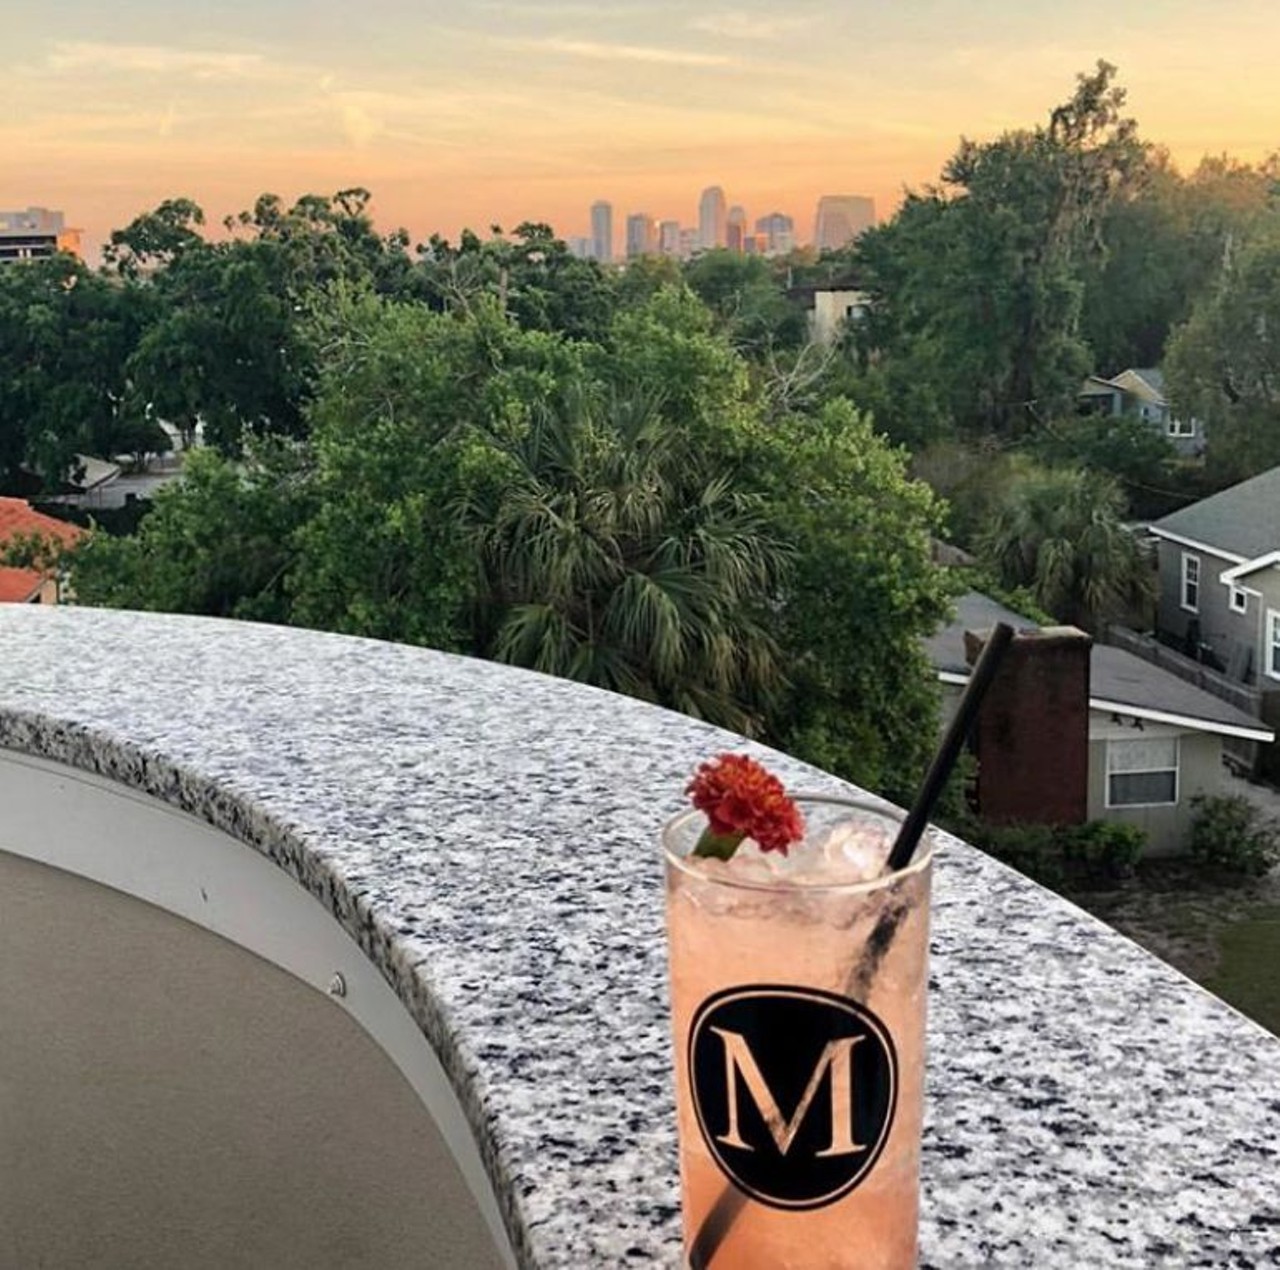 M Lounge
2000 N Orange Ave. Suite 300, 321-430-1140, M Lounge  
Fee: no
This rooftop bar may not be all that close to the launch site, but it&#146;s far enough from any of the taller buildings in the downtown area that you can still get a view of take off. Their cocktails also add to the viewing experience as well. 
Photo via mloungebar /Instagram